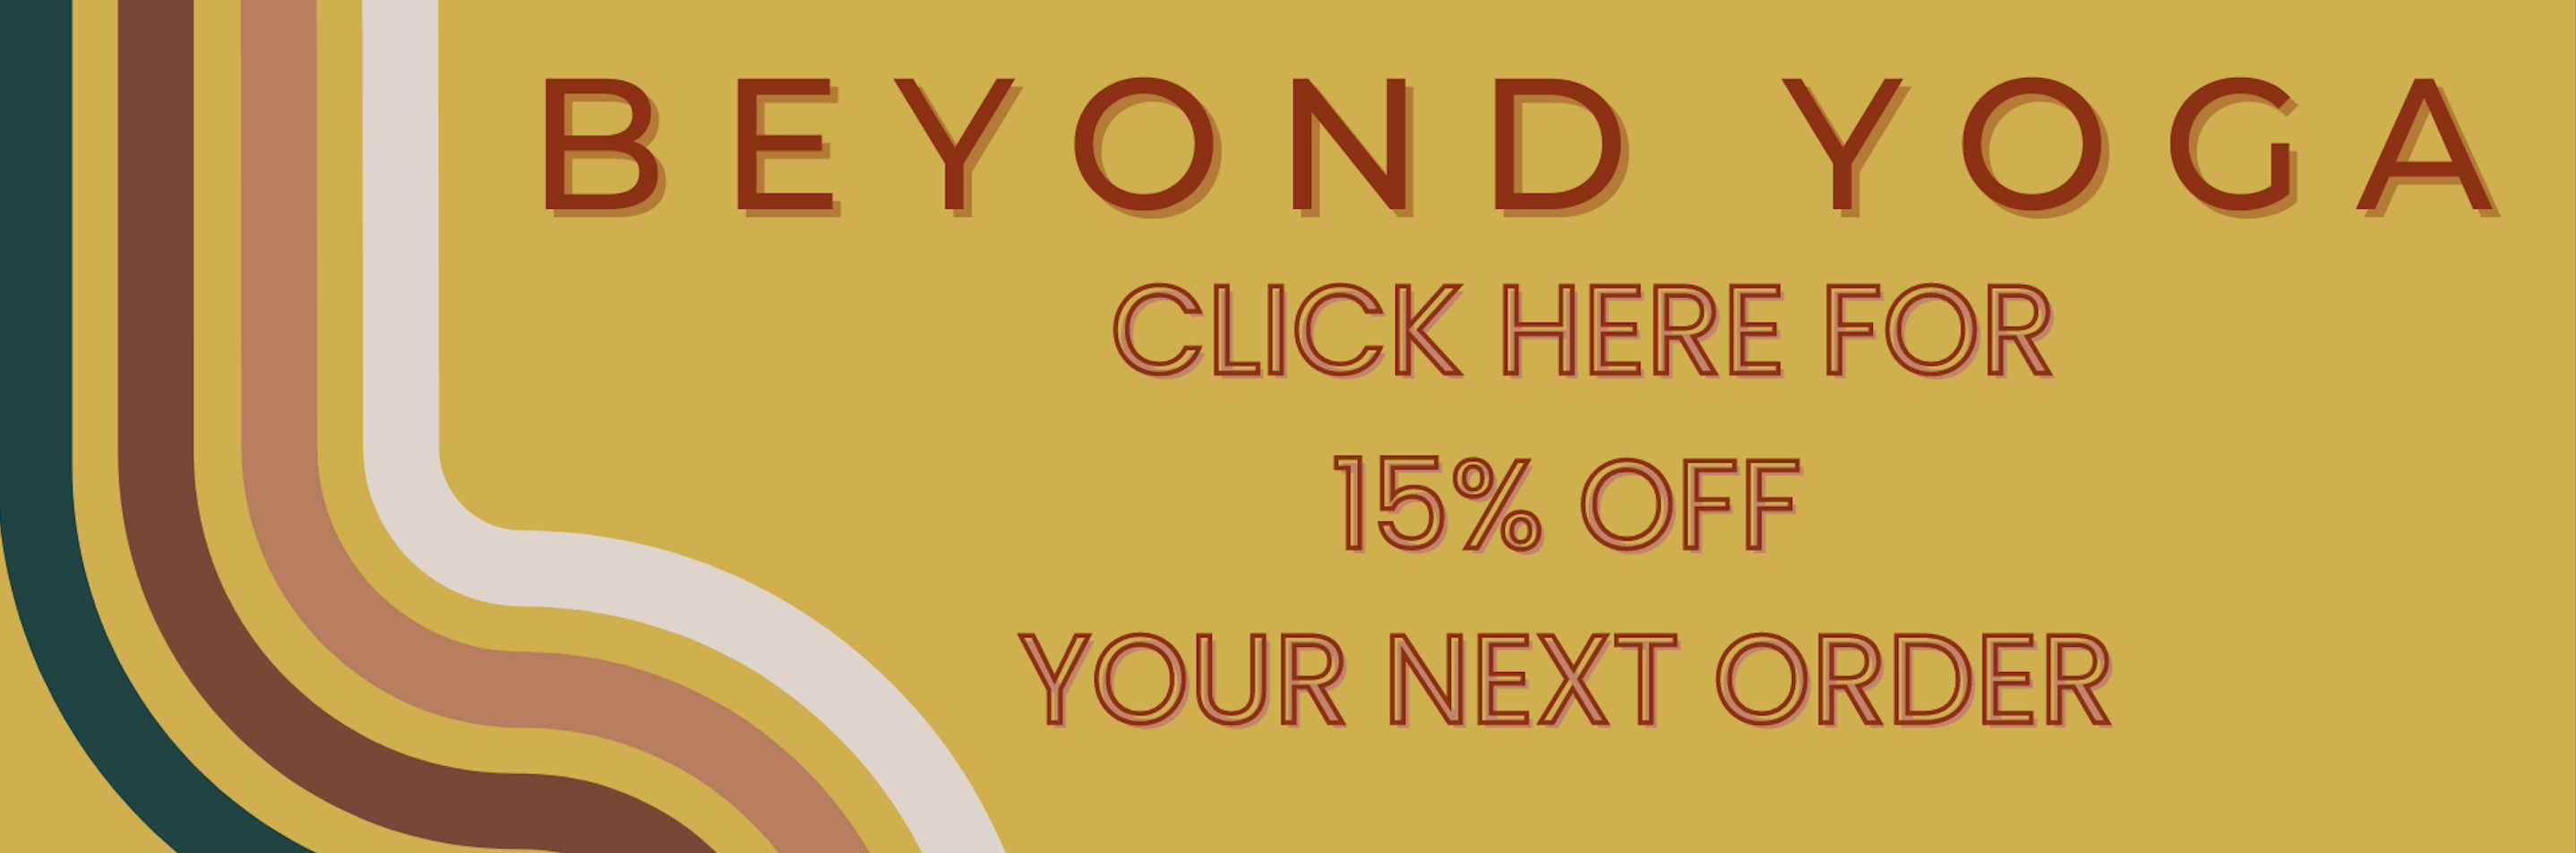 Beyond Yoga Discount Code, Promo Code, Promotion Code